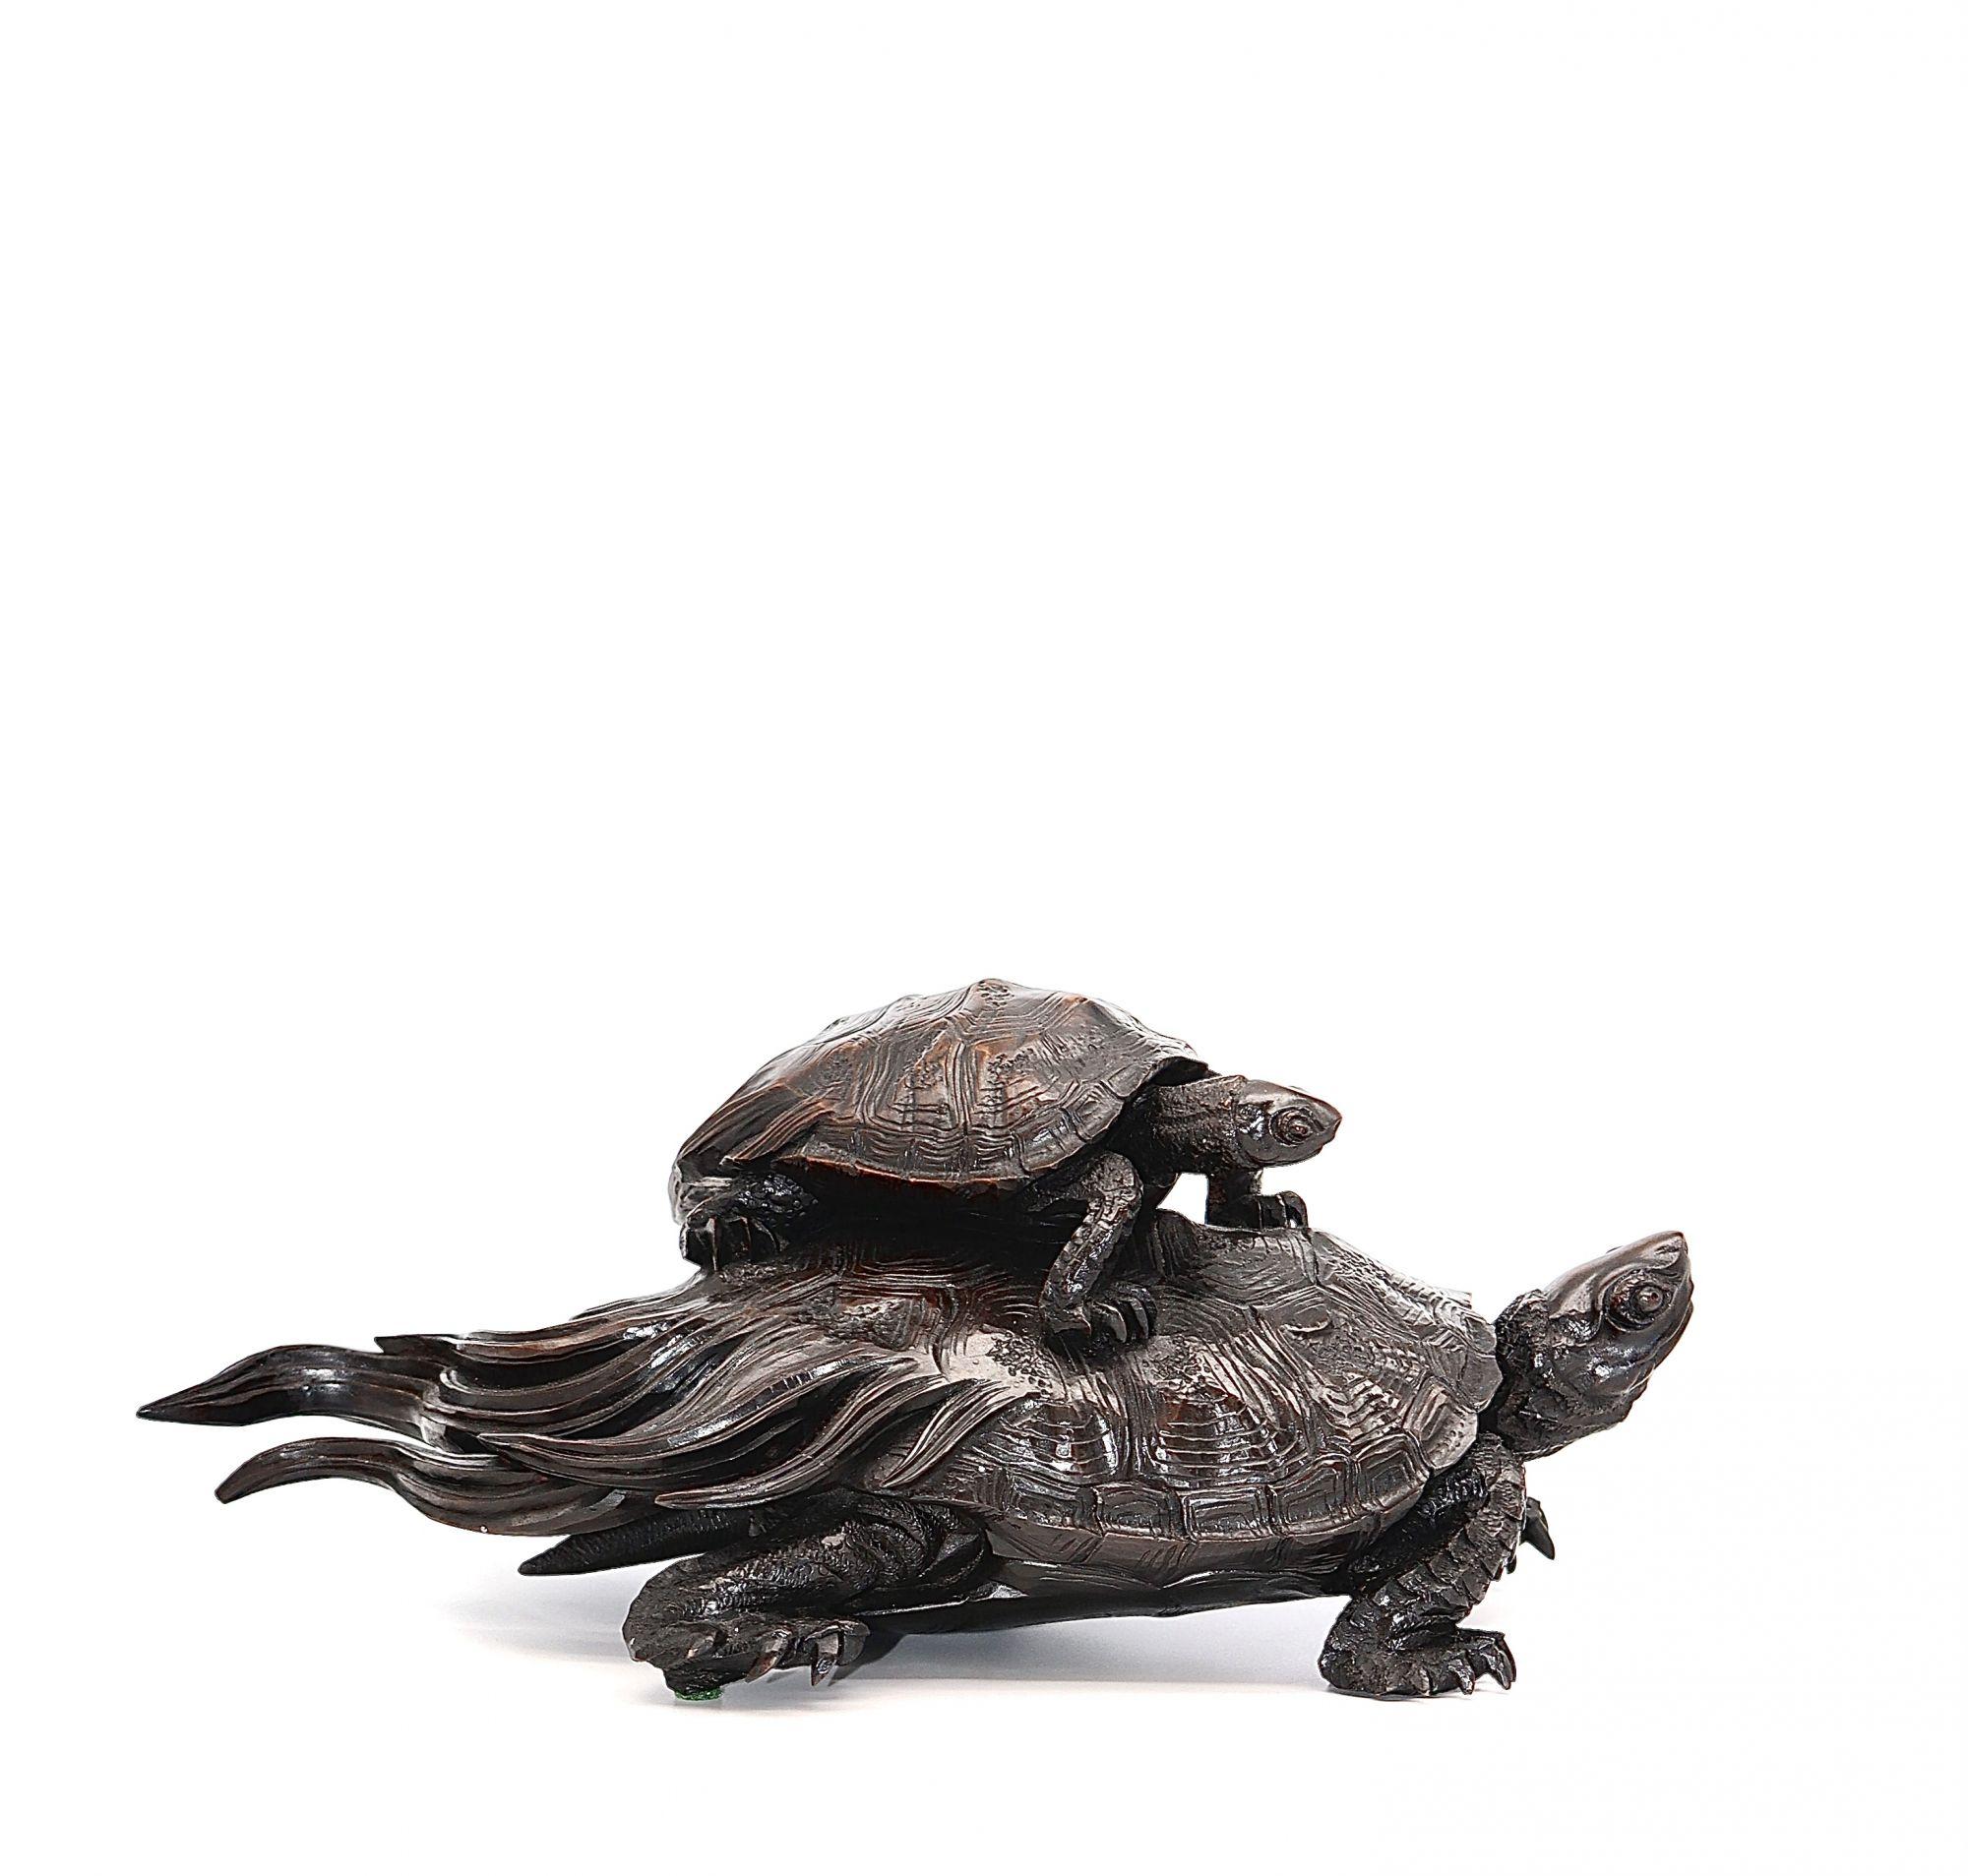 Antique Japanese Wood Carving of Two Minogames 'Mythological Turtle', 18th C In Fair Condition For Sale In North Miami, FL